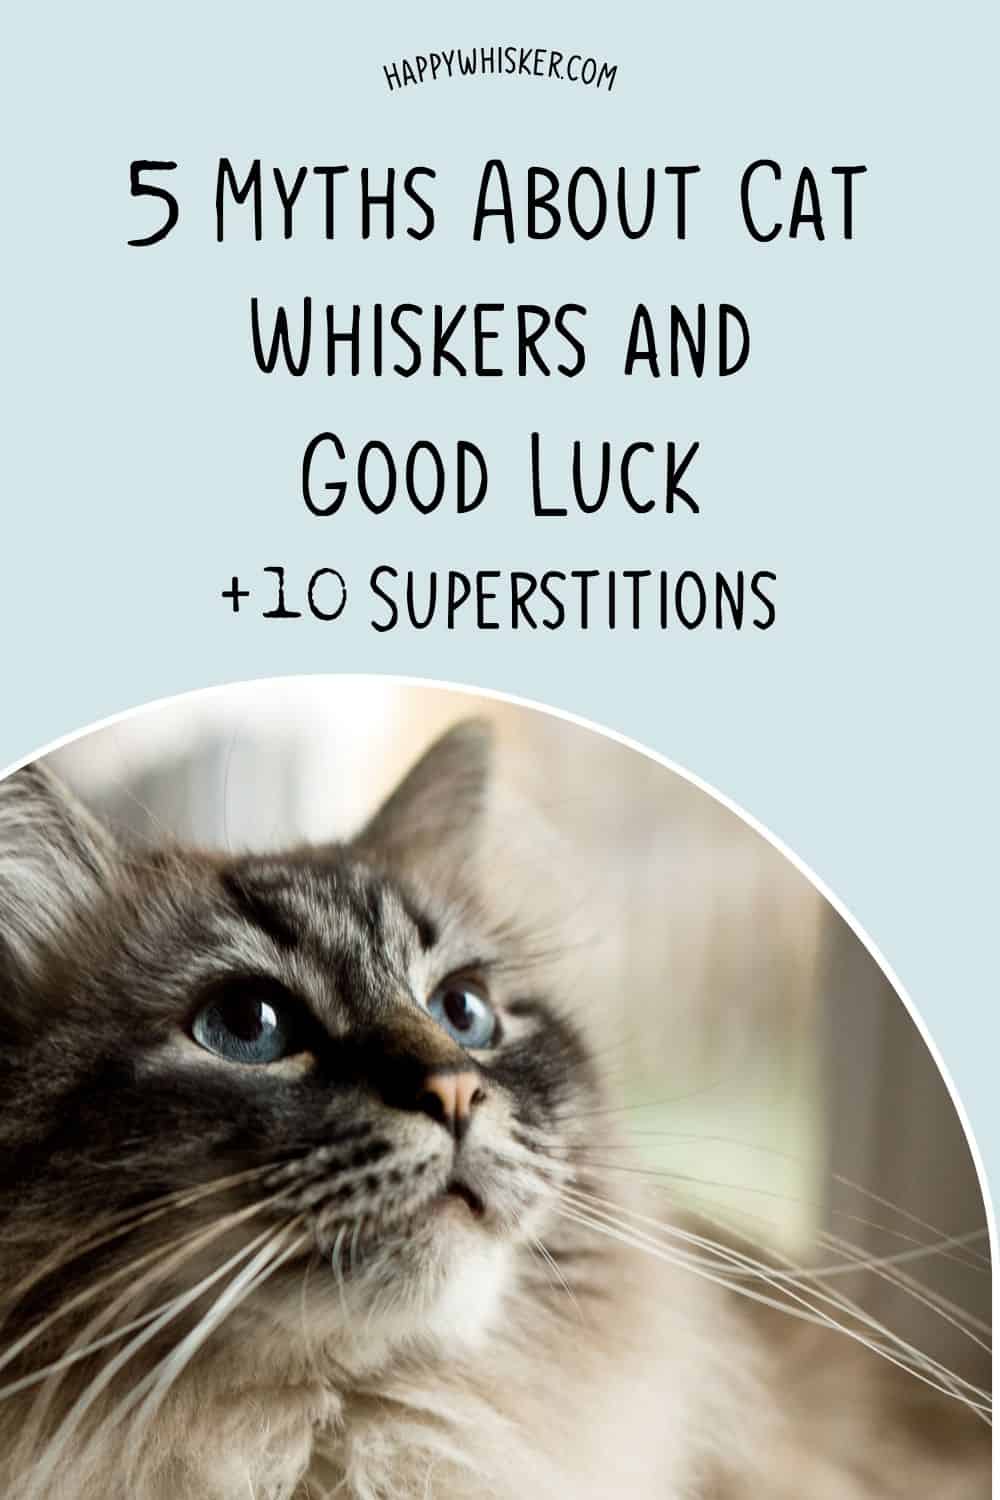 5 Myths About Cat Whiskers & Good Luck + 10 Superstitions Pinterest